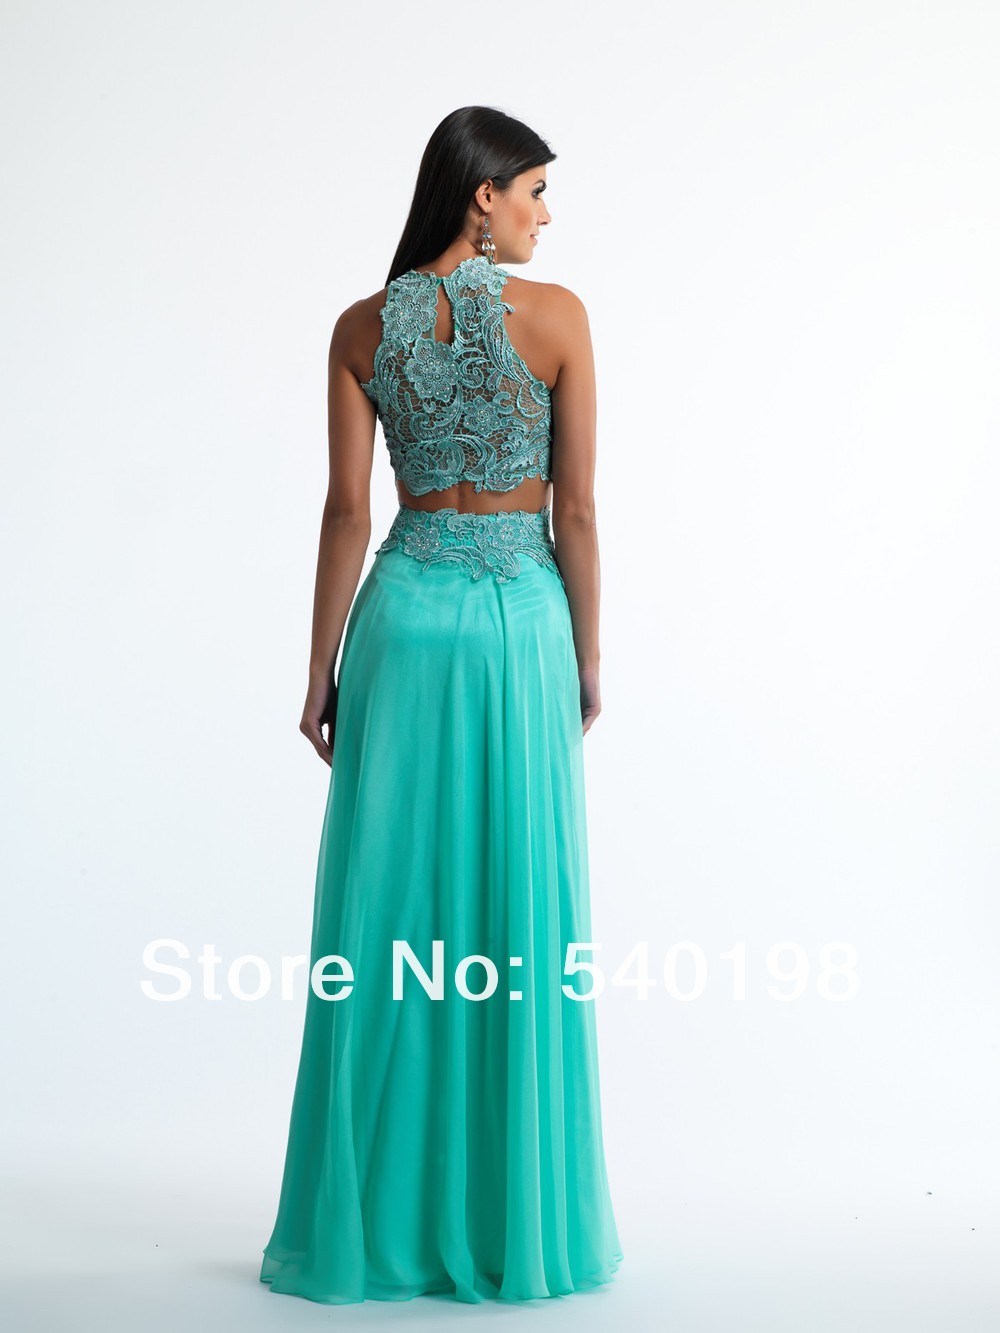 ... High-Neck Lace Top Long Two-Piece Prom Dresses Evening Gown under 100